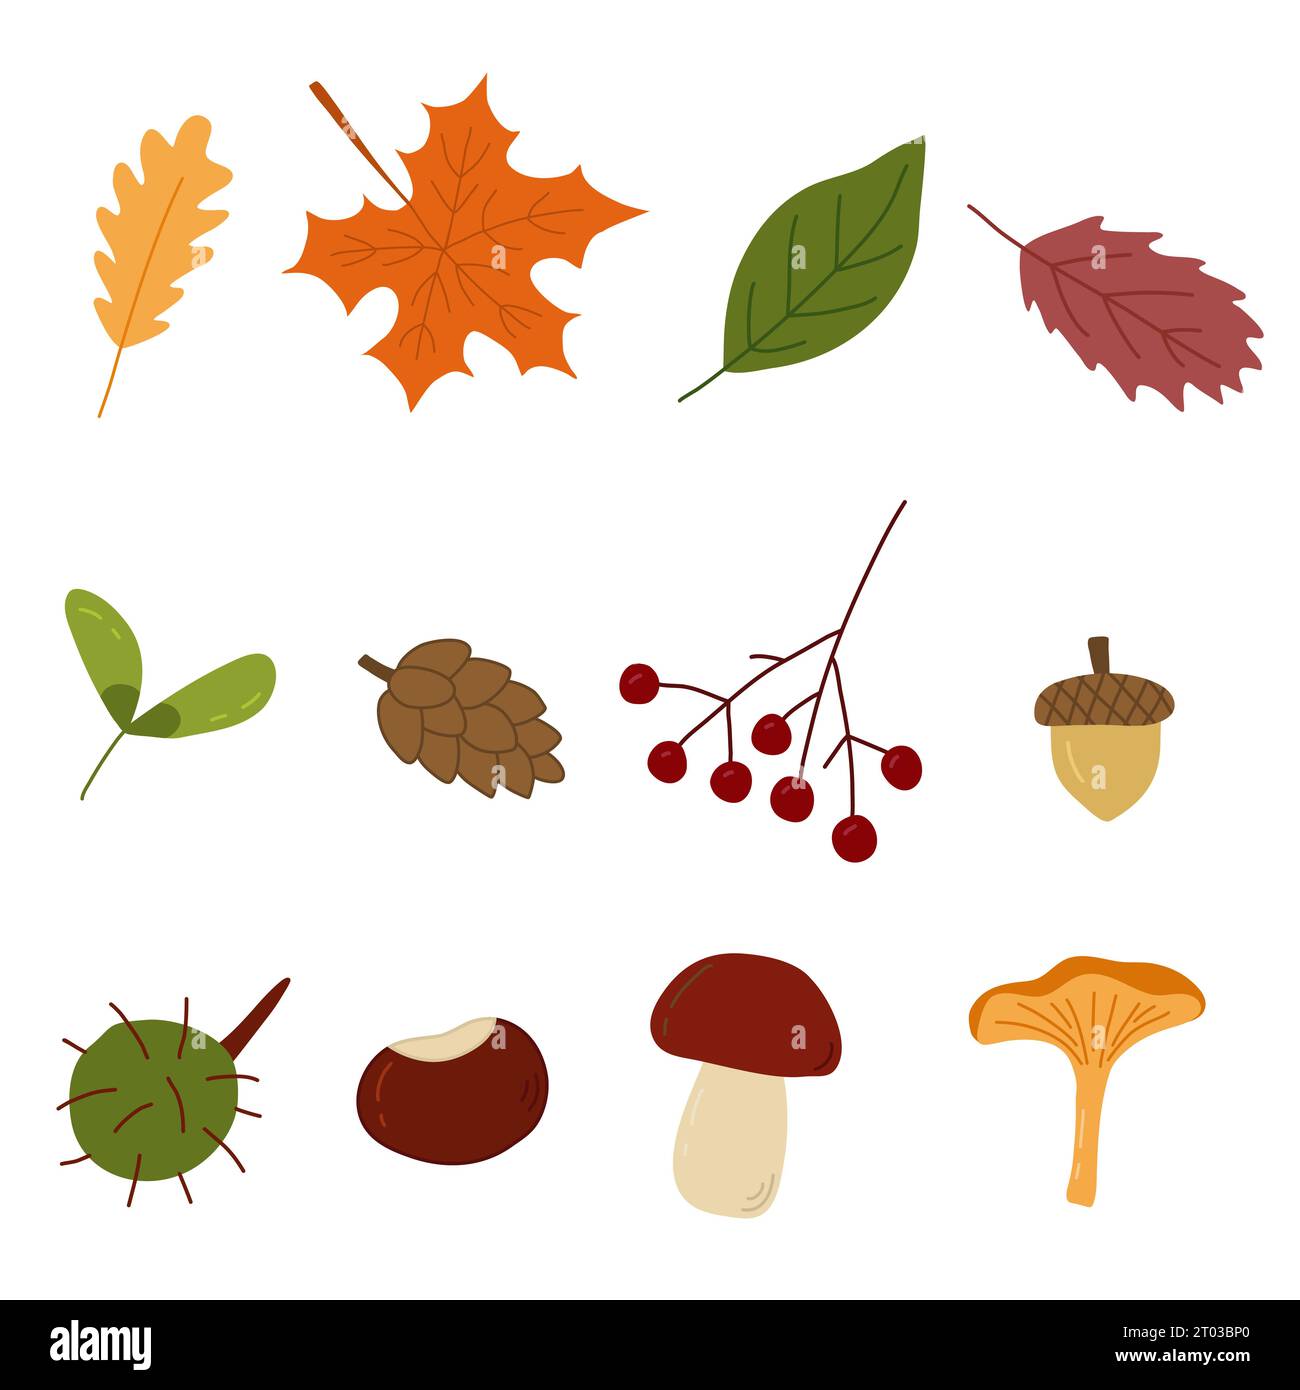 Set of autumn elements, leaves, berry, mushrooms, doodle style vector illustration Stock Vector